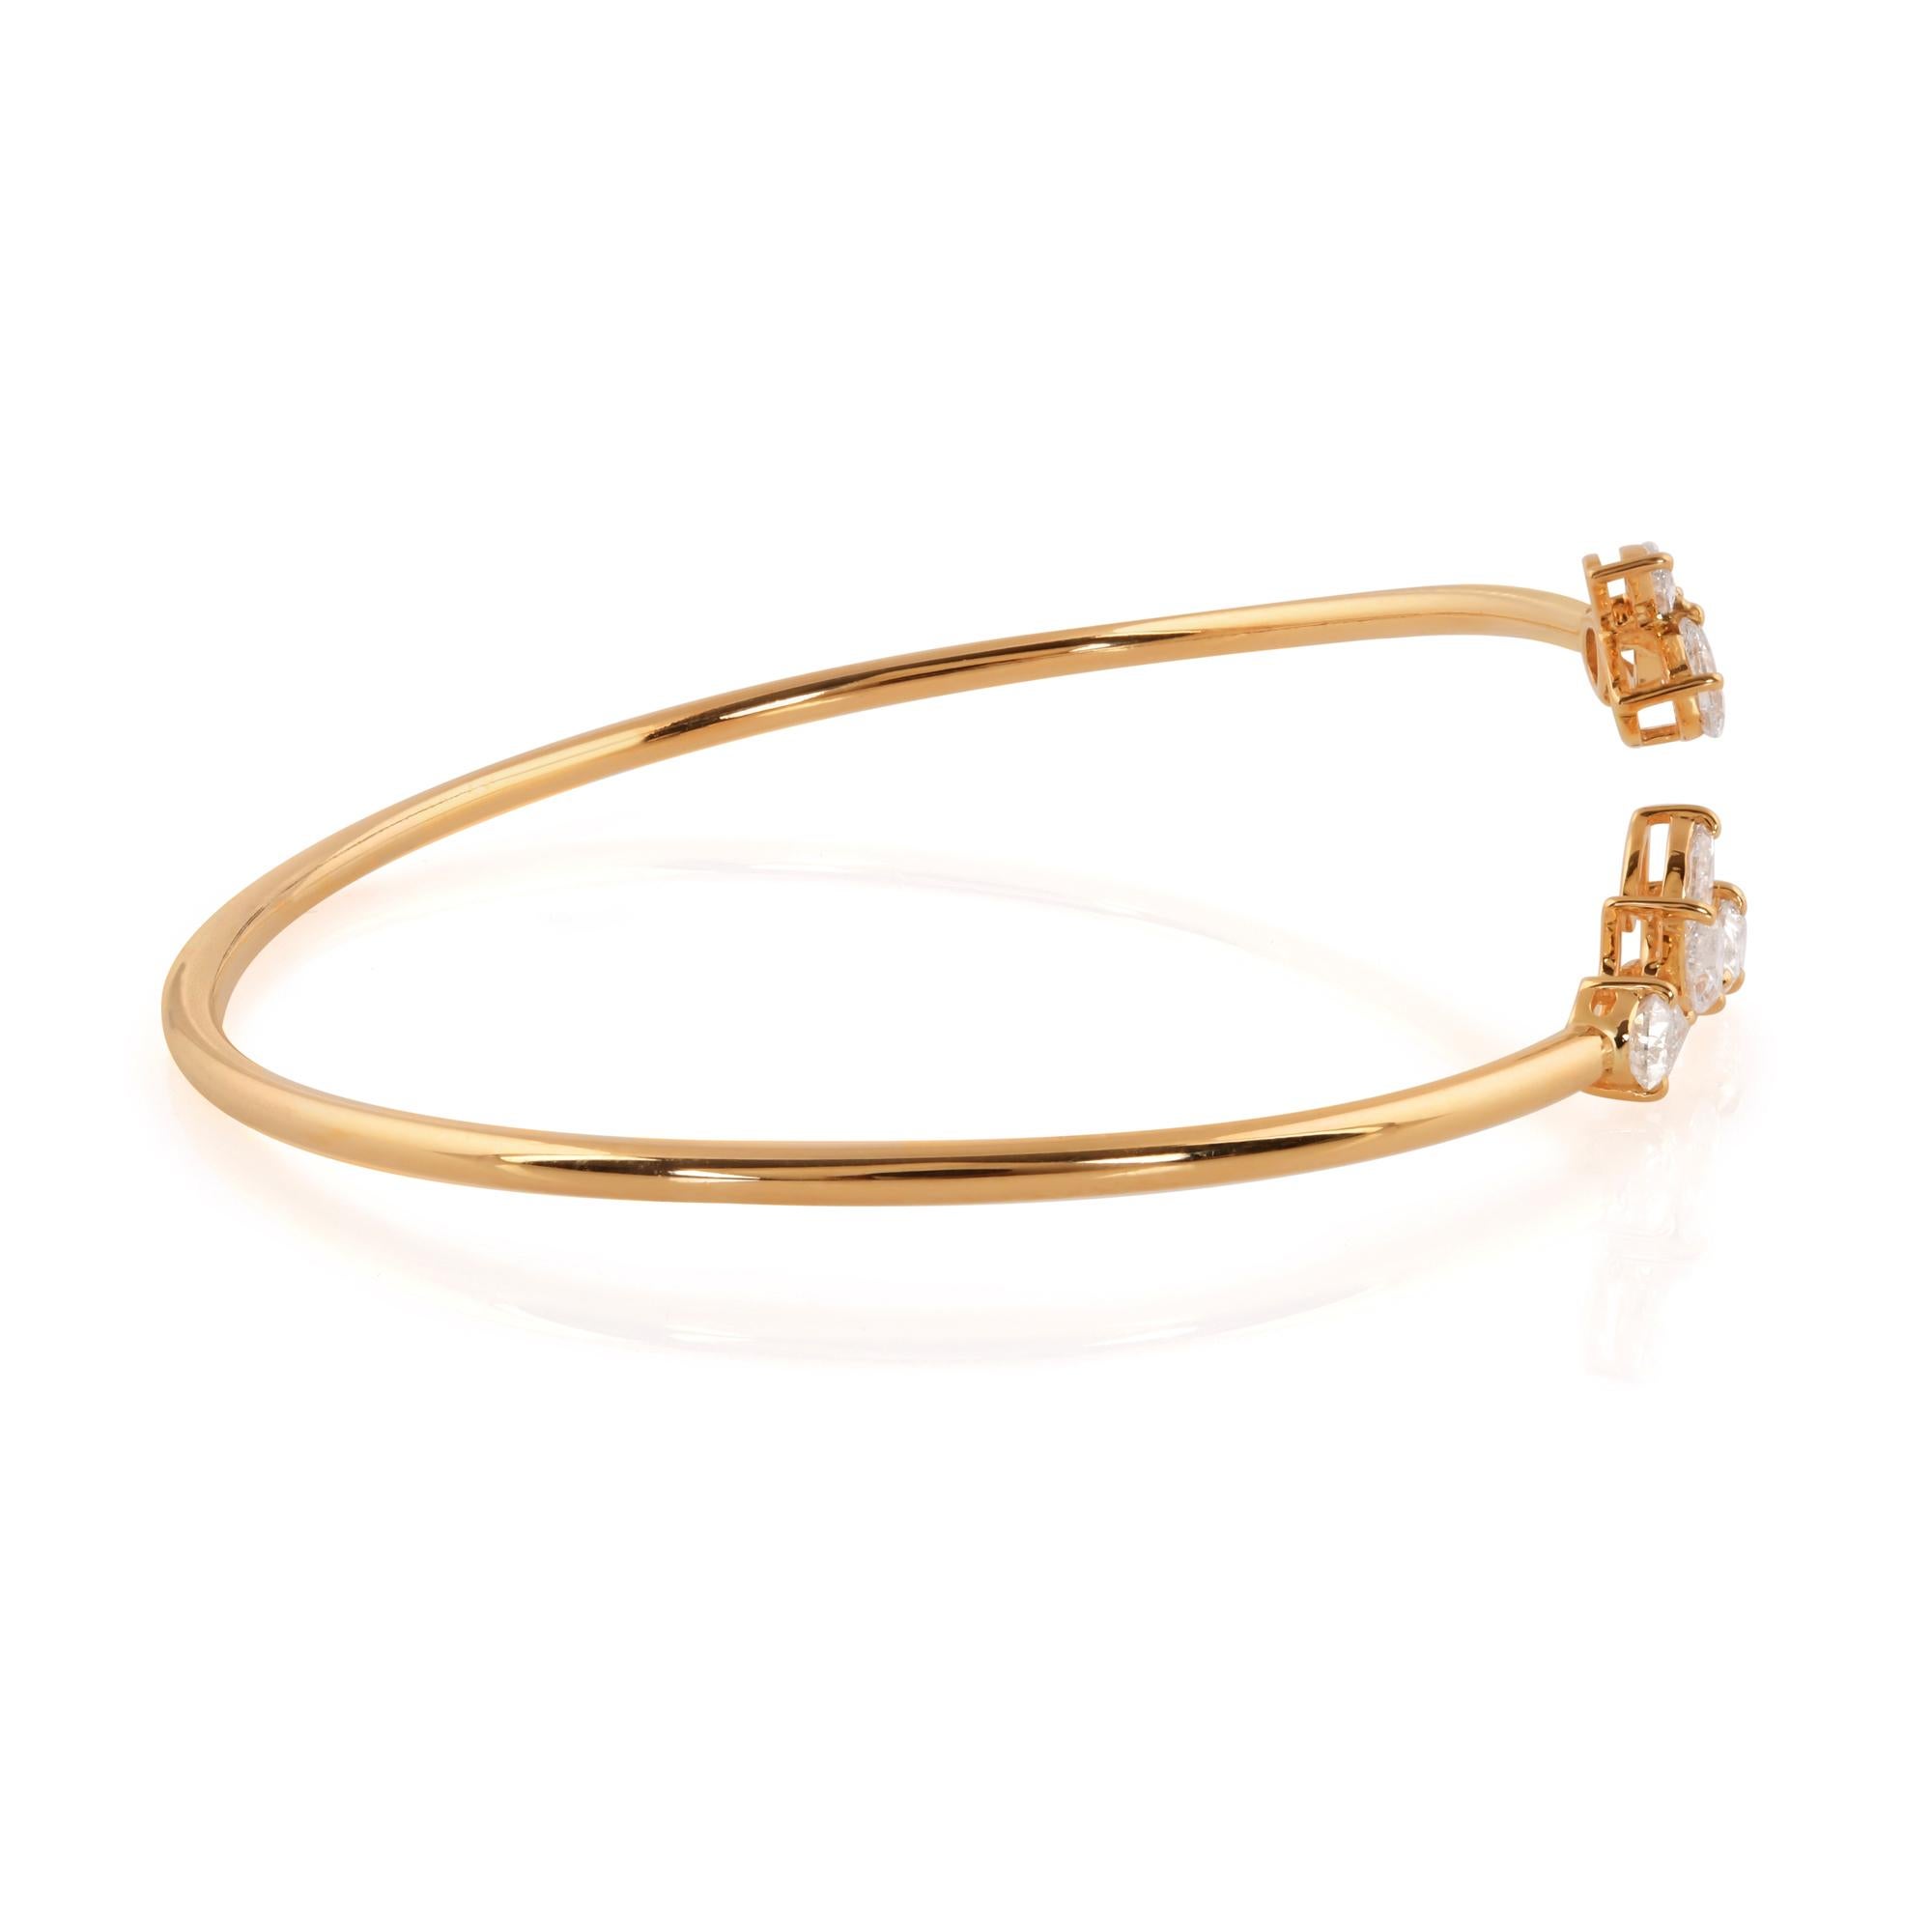 Indulge in the exquisite allure of luxury with our Marquise & Pear Diamond Cuff Bangle Bracelet, crafted in radiant 14 Karat Yellow Gold. This opulent piece of fine jewelry exudes sophistication and elegance, perfect for those special occasions when